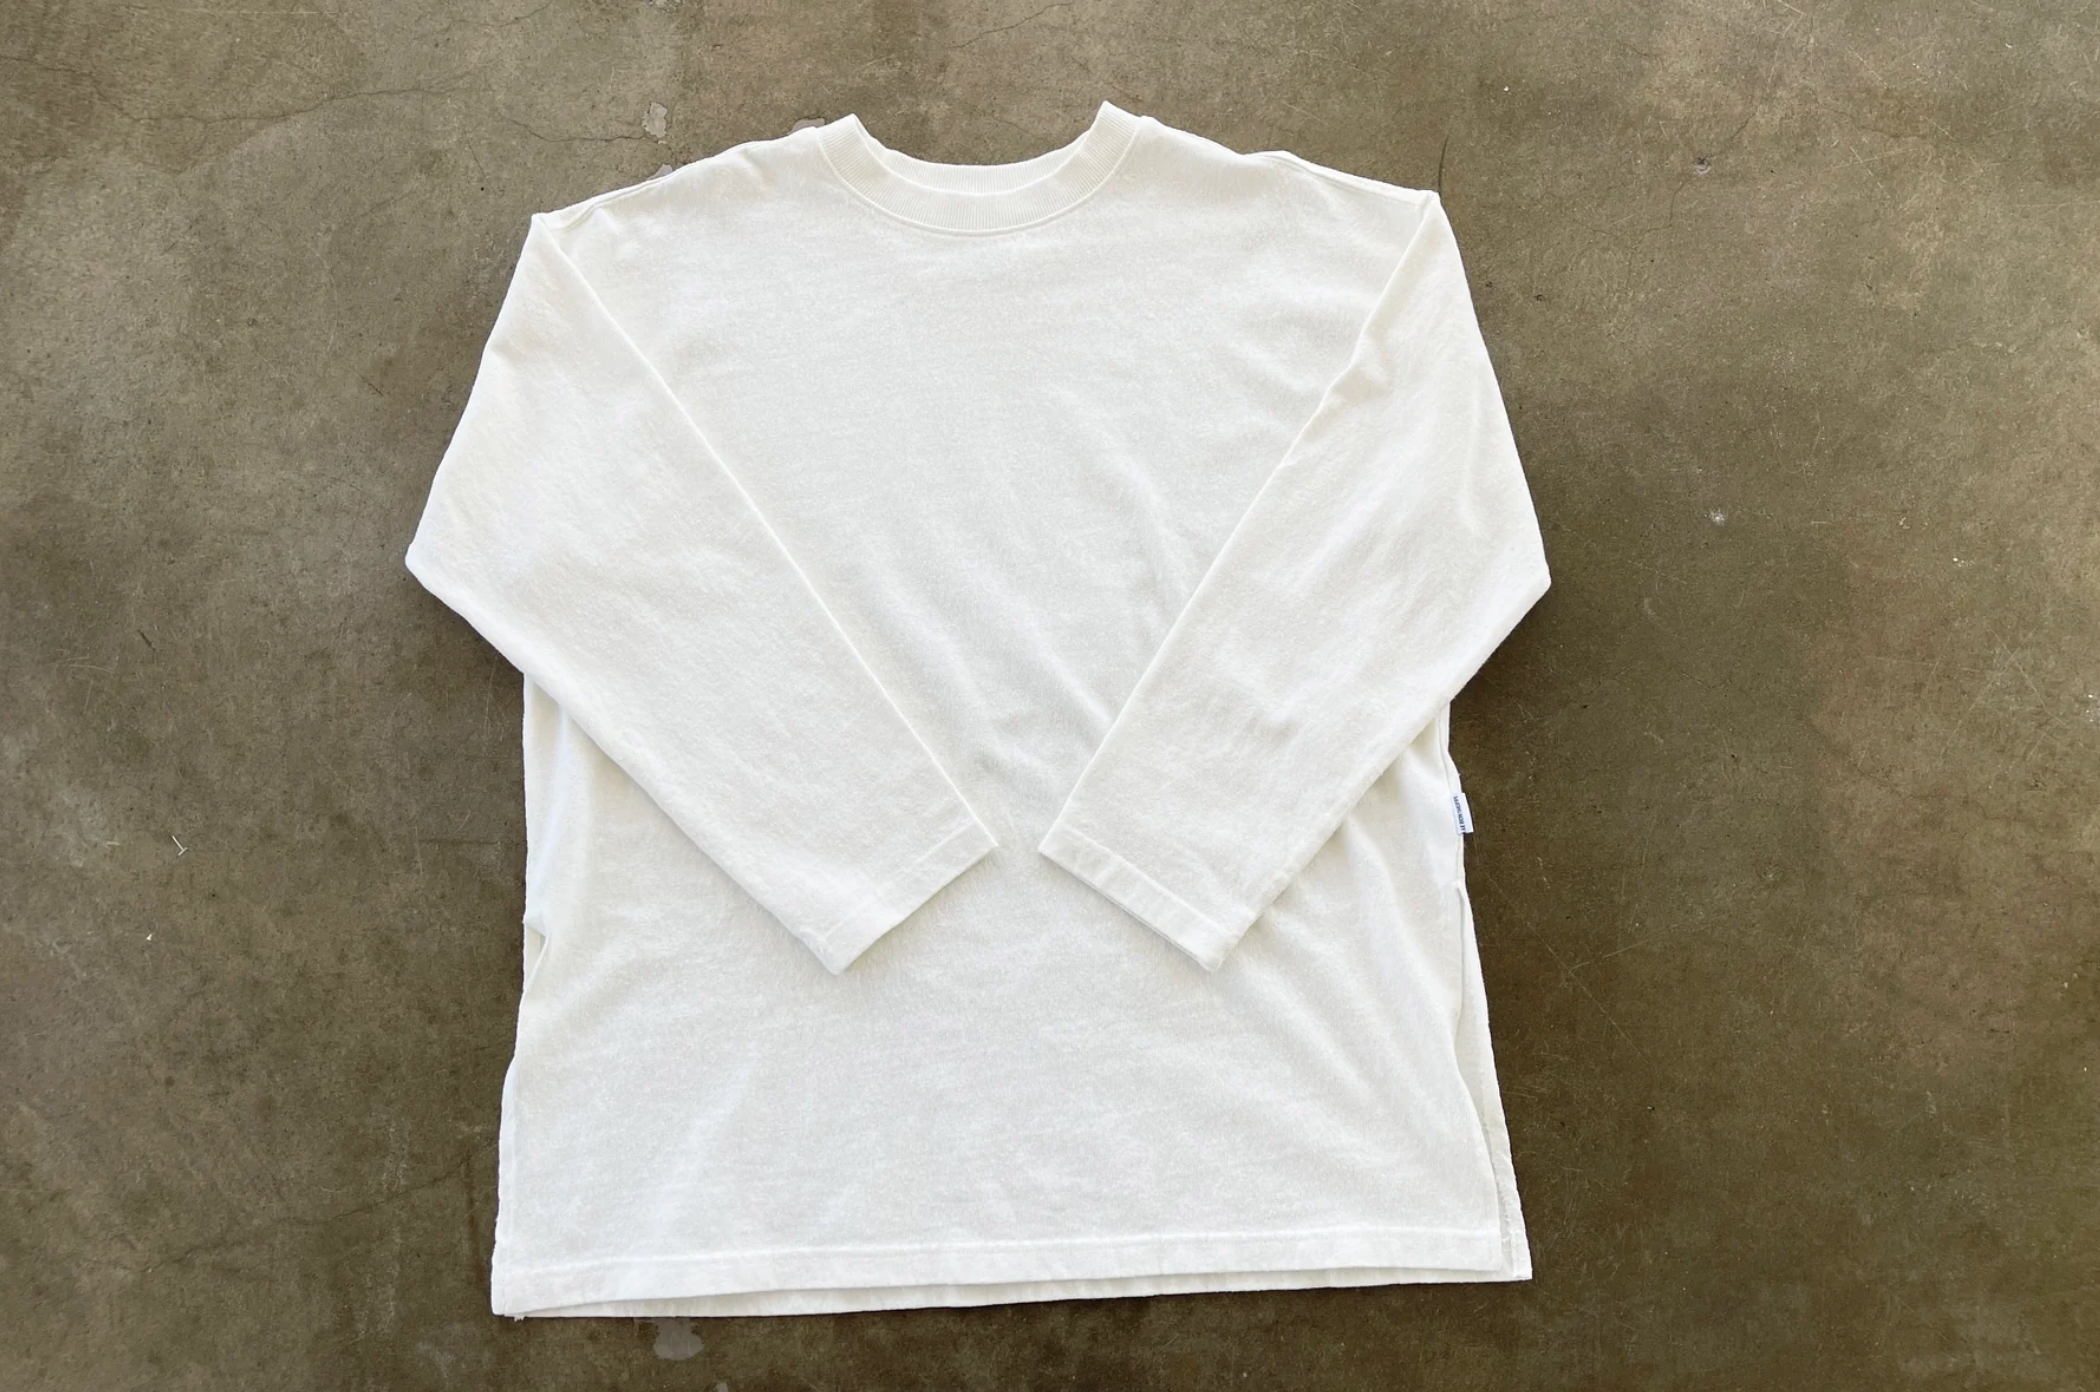 Product Image for Sunday Tee, White Cotton